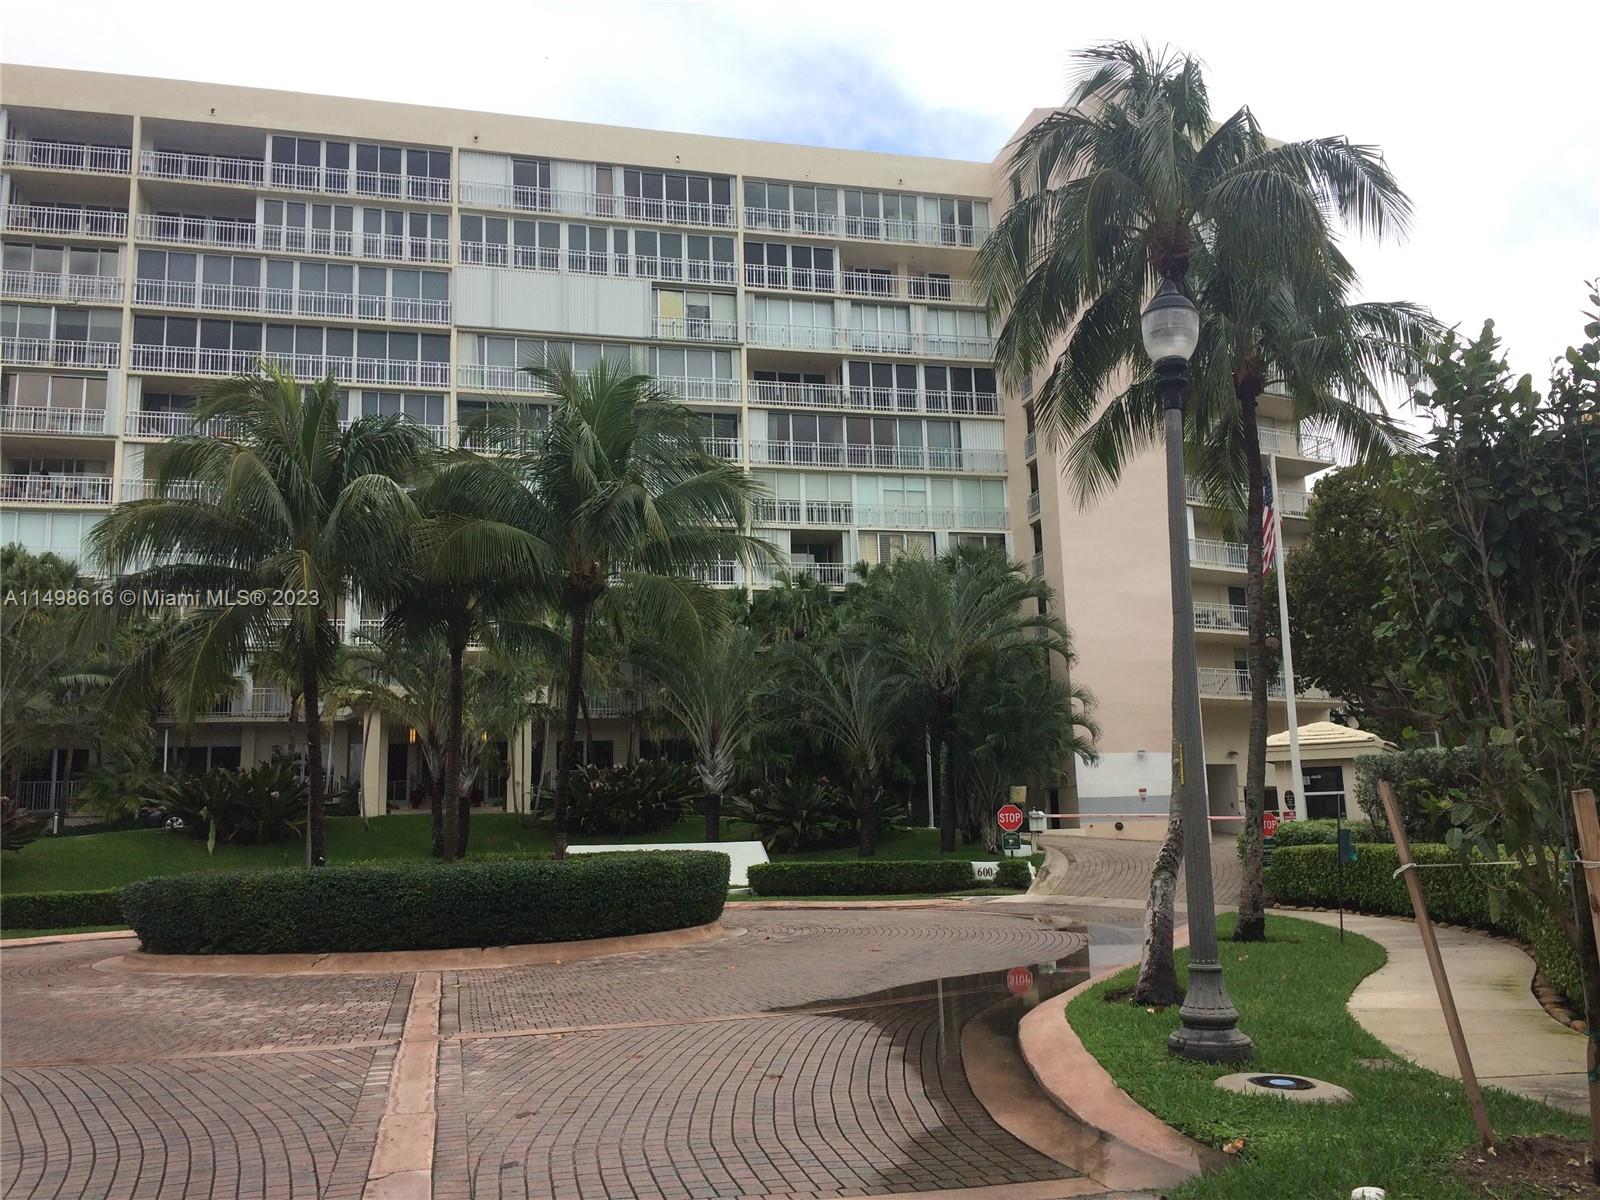 Unfurnished spacious 3 bedroom apt, high impact windows.  Den/office off master bedroom.  Parking space conveniently located near entry door.  Lobby beautifully remodeled.  Amenities include private beach access, pool, BBQ area, tennis, gym, party room, concierge.